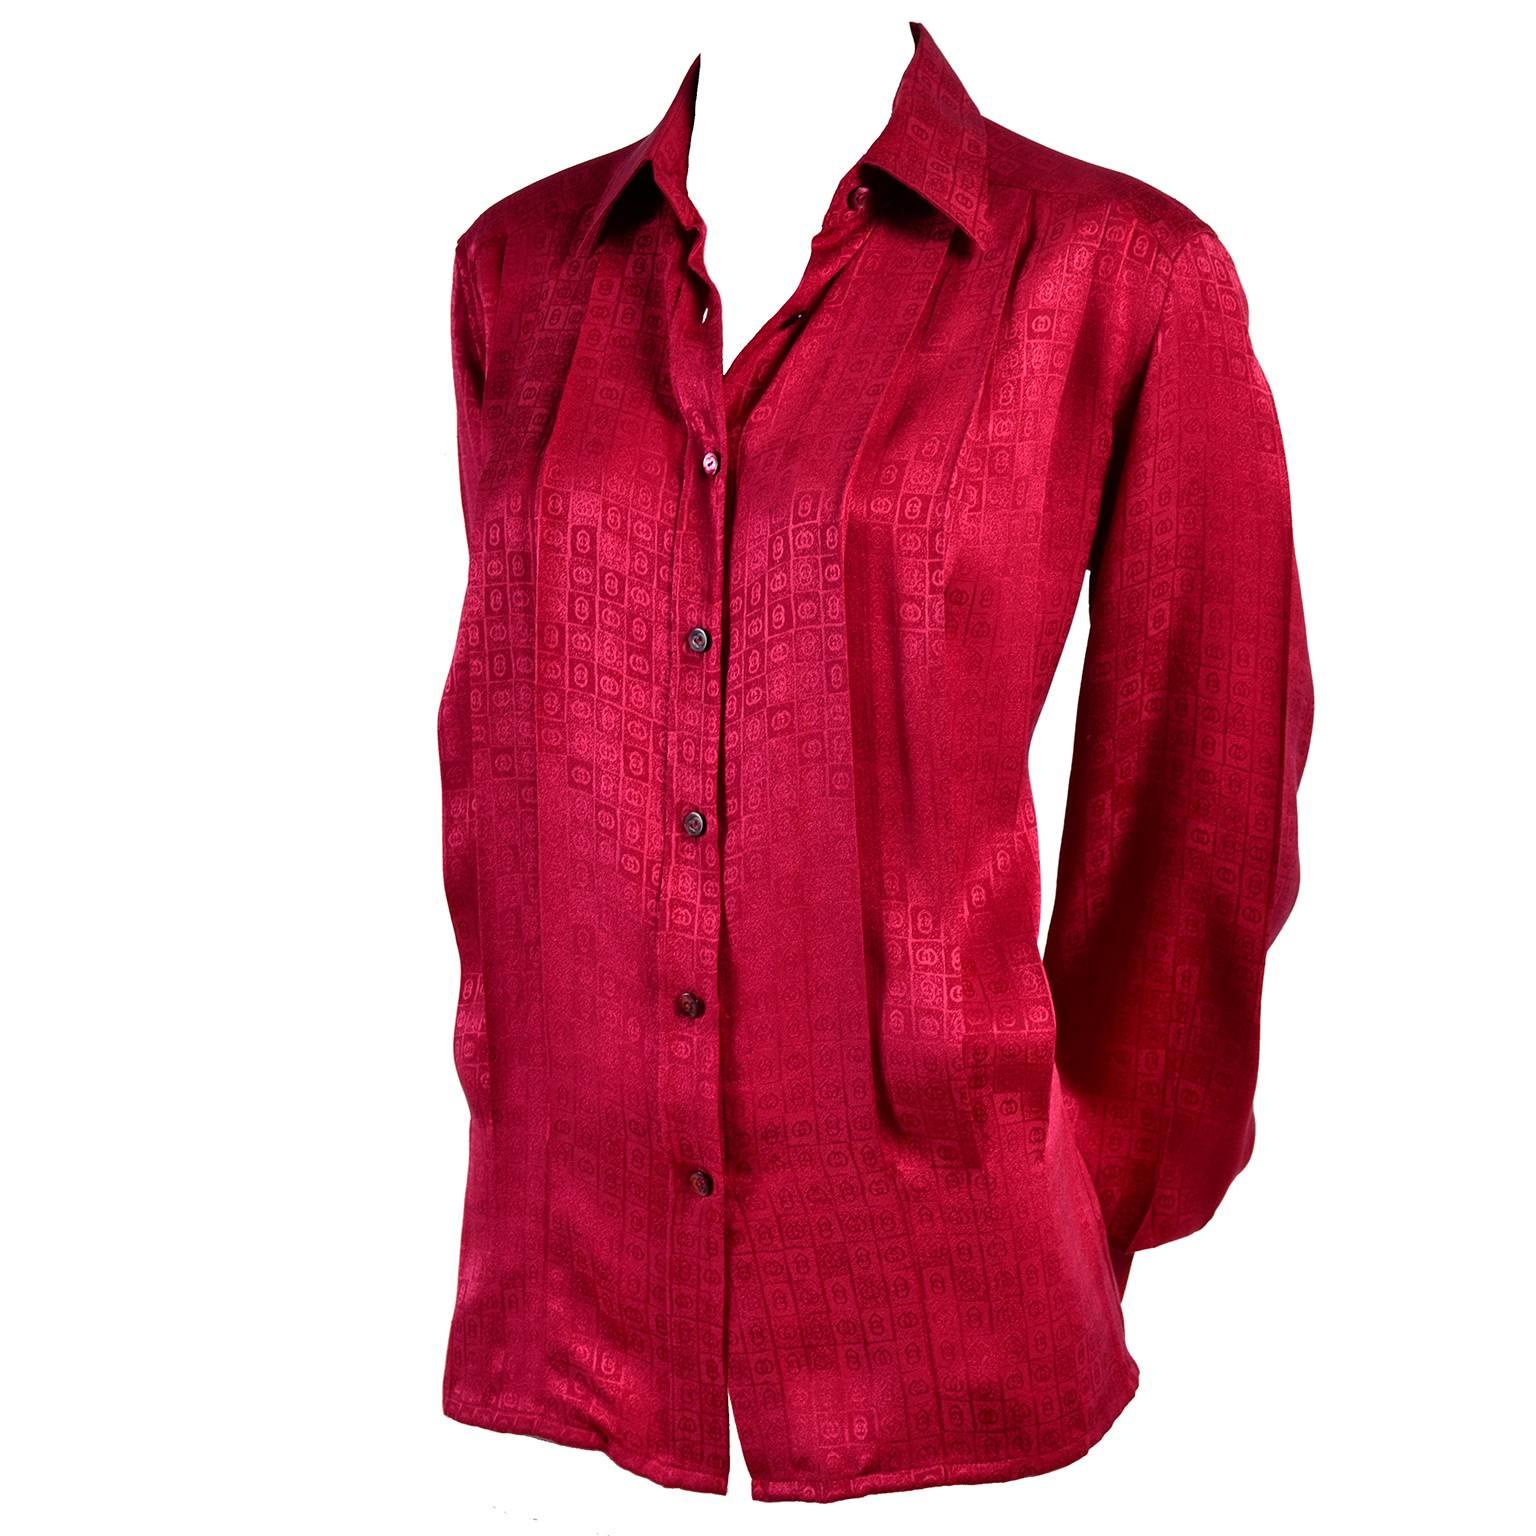 This is a gorgeous Gucci silk blouse in a deep red with the Gucci G logo signature in the tone on tone print.  This early 1980's blouse also has Gucci written on the buttons up the front. These Gucci silk blouses are so well made and they are always